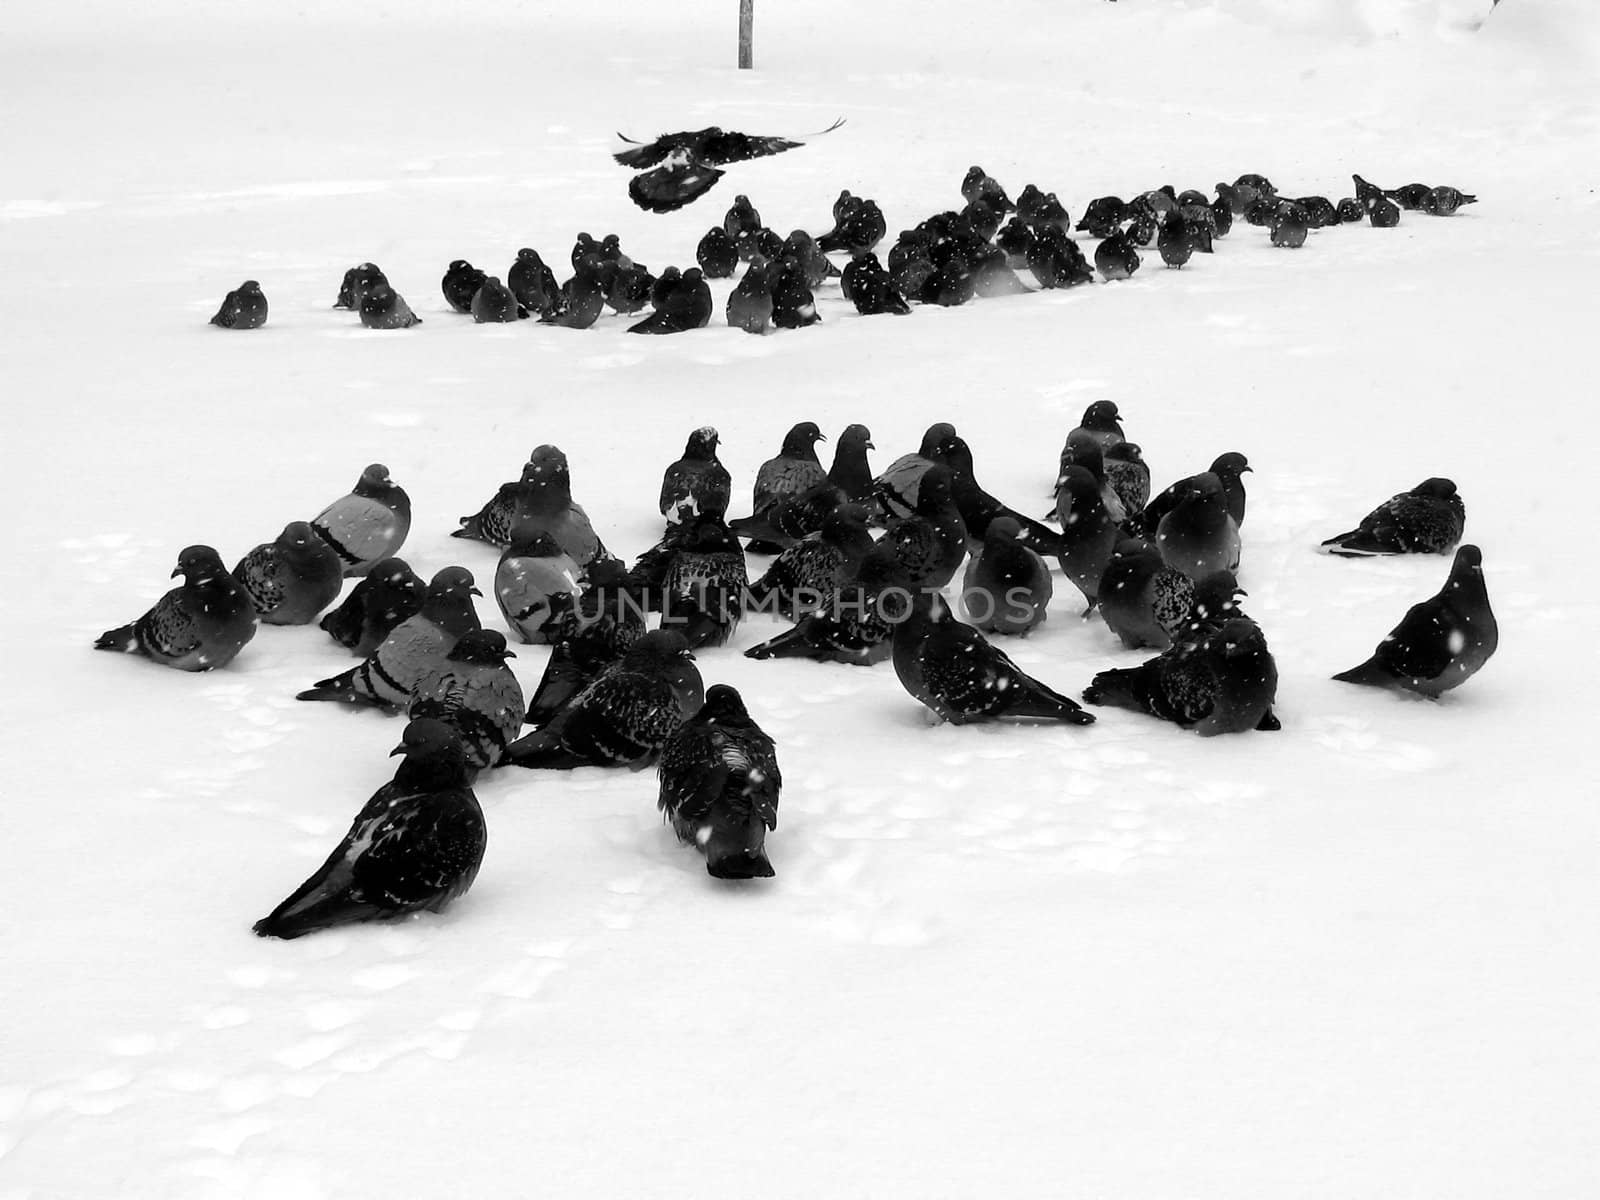 Pigeons on snow by tomatto